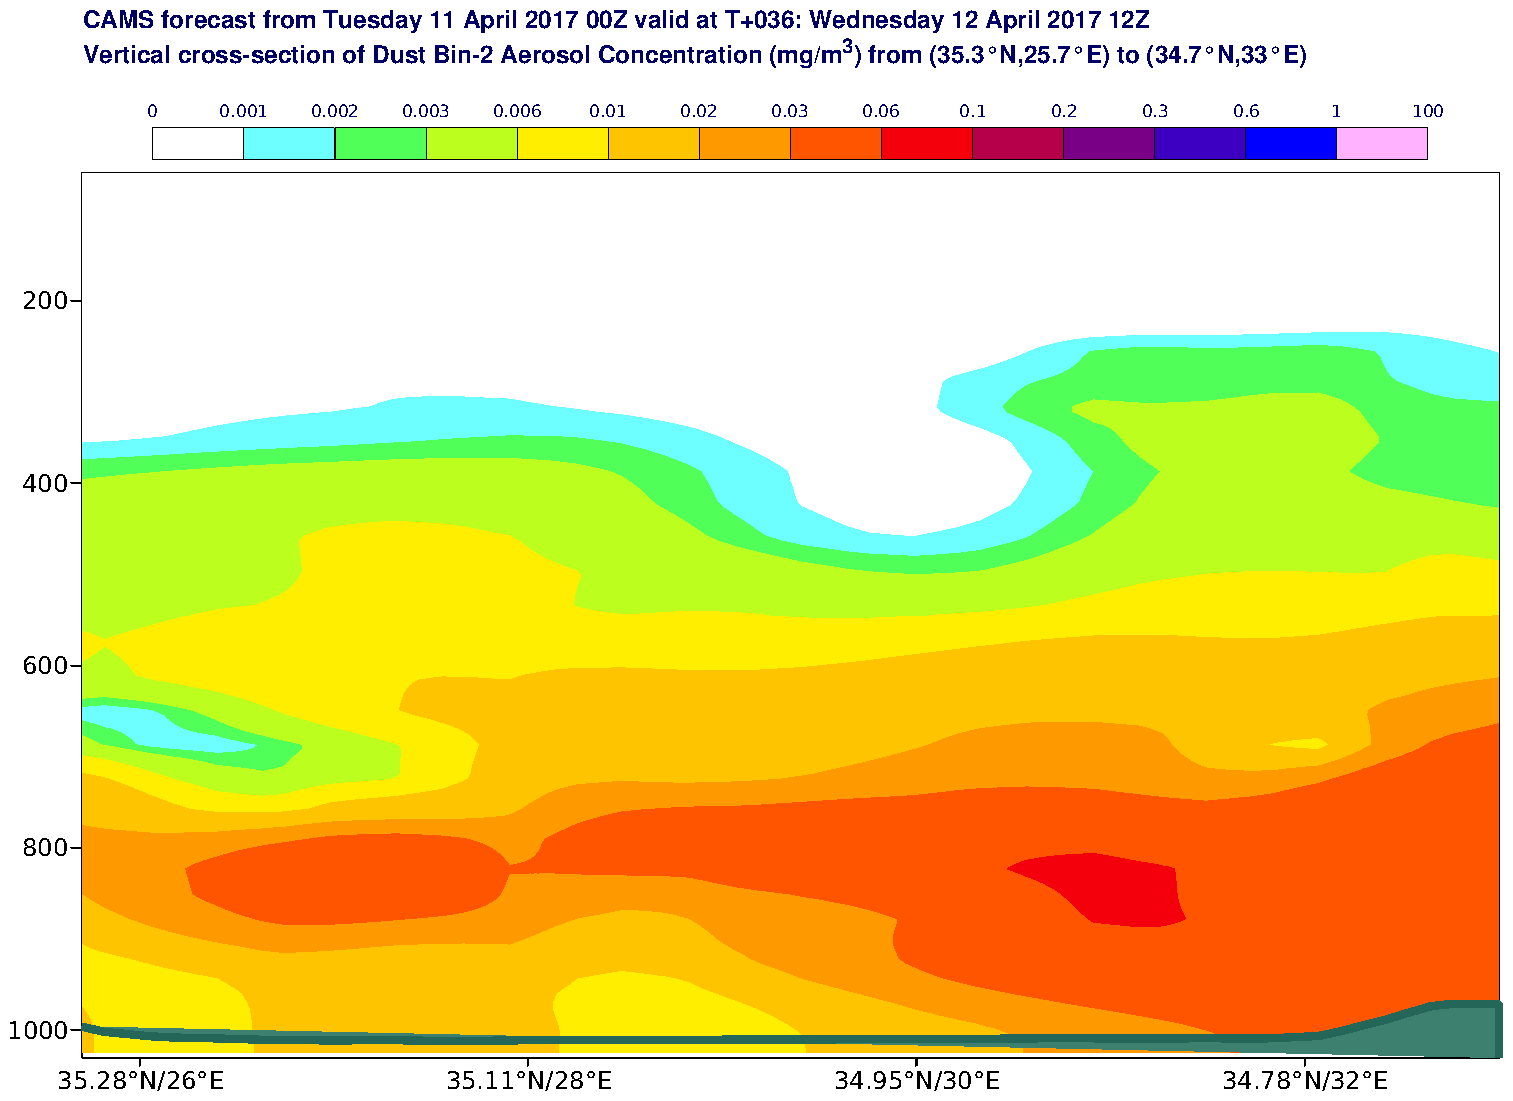 Vertical cross-section of Dust Bin-2 Aerosol Concentration (mg/m3) valid at T36 - 2017-04-12 12:00